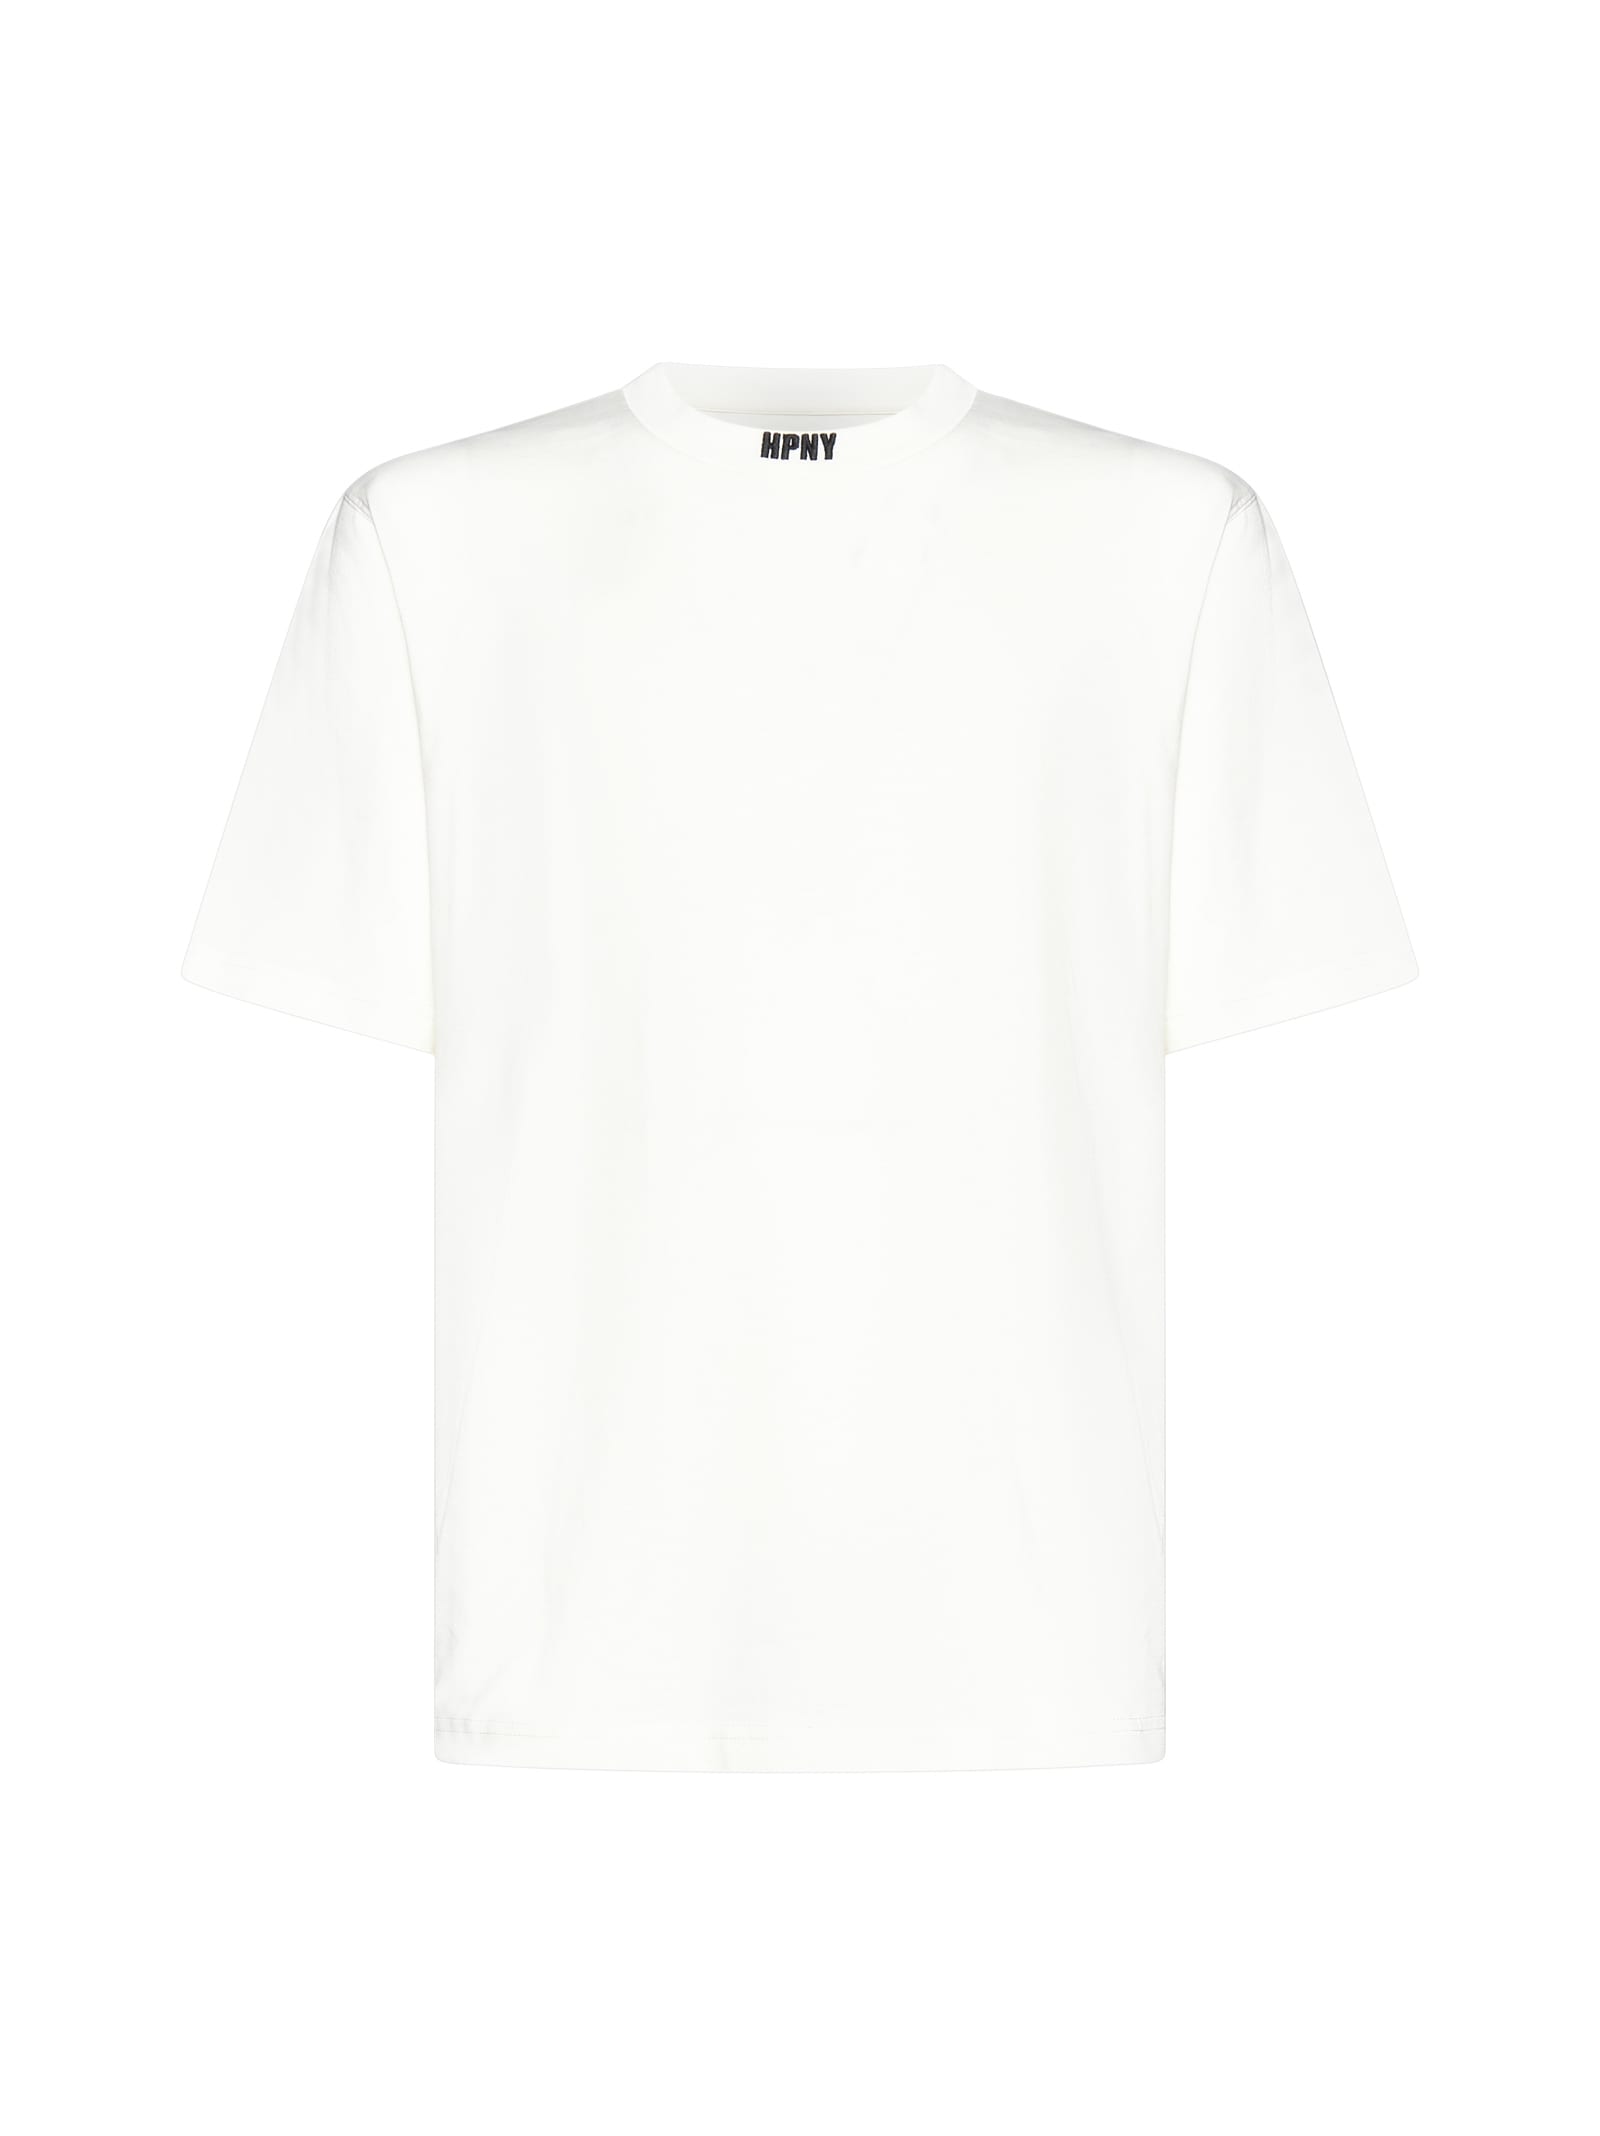 Hpny Embroidered T-shirt